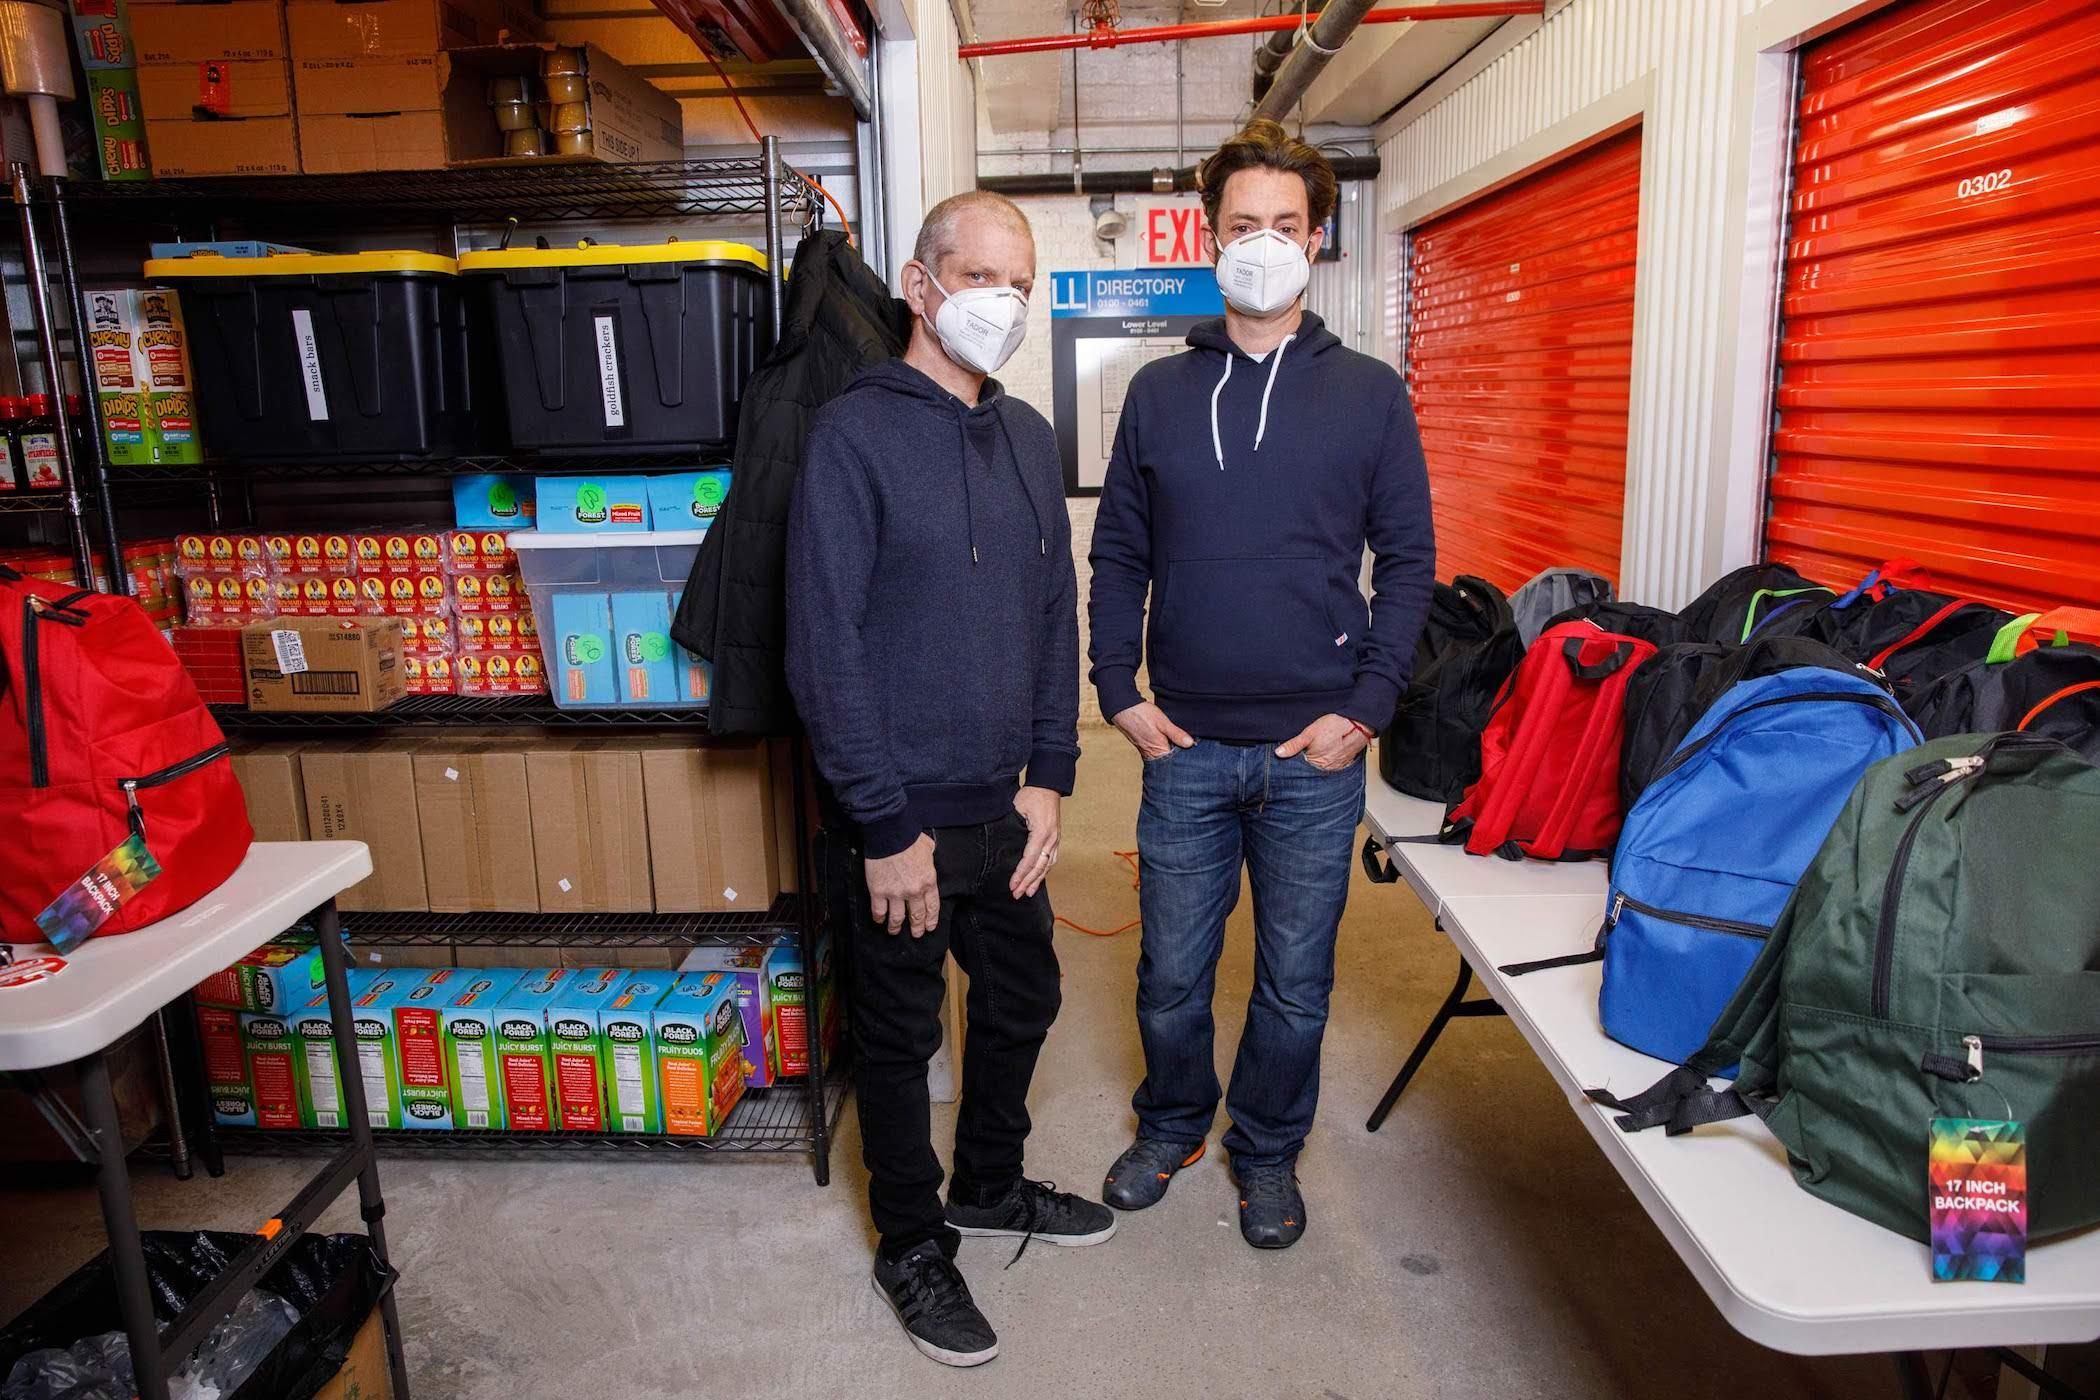 gay couple supplies backpacks full of COVID supplies to homeless populations